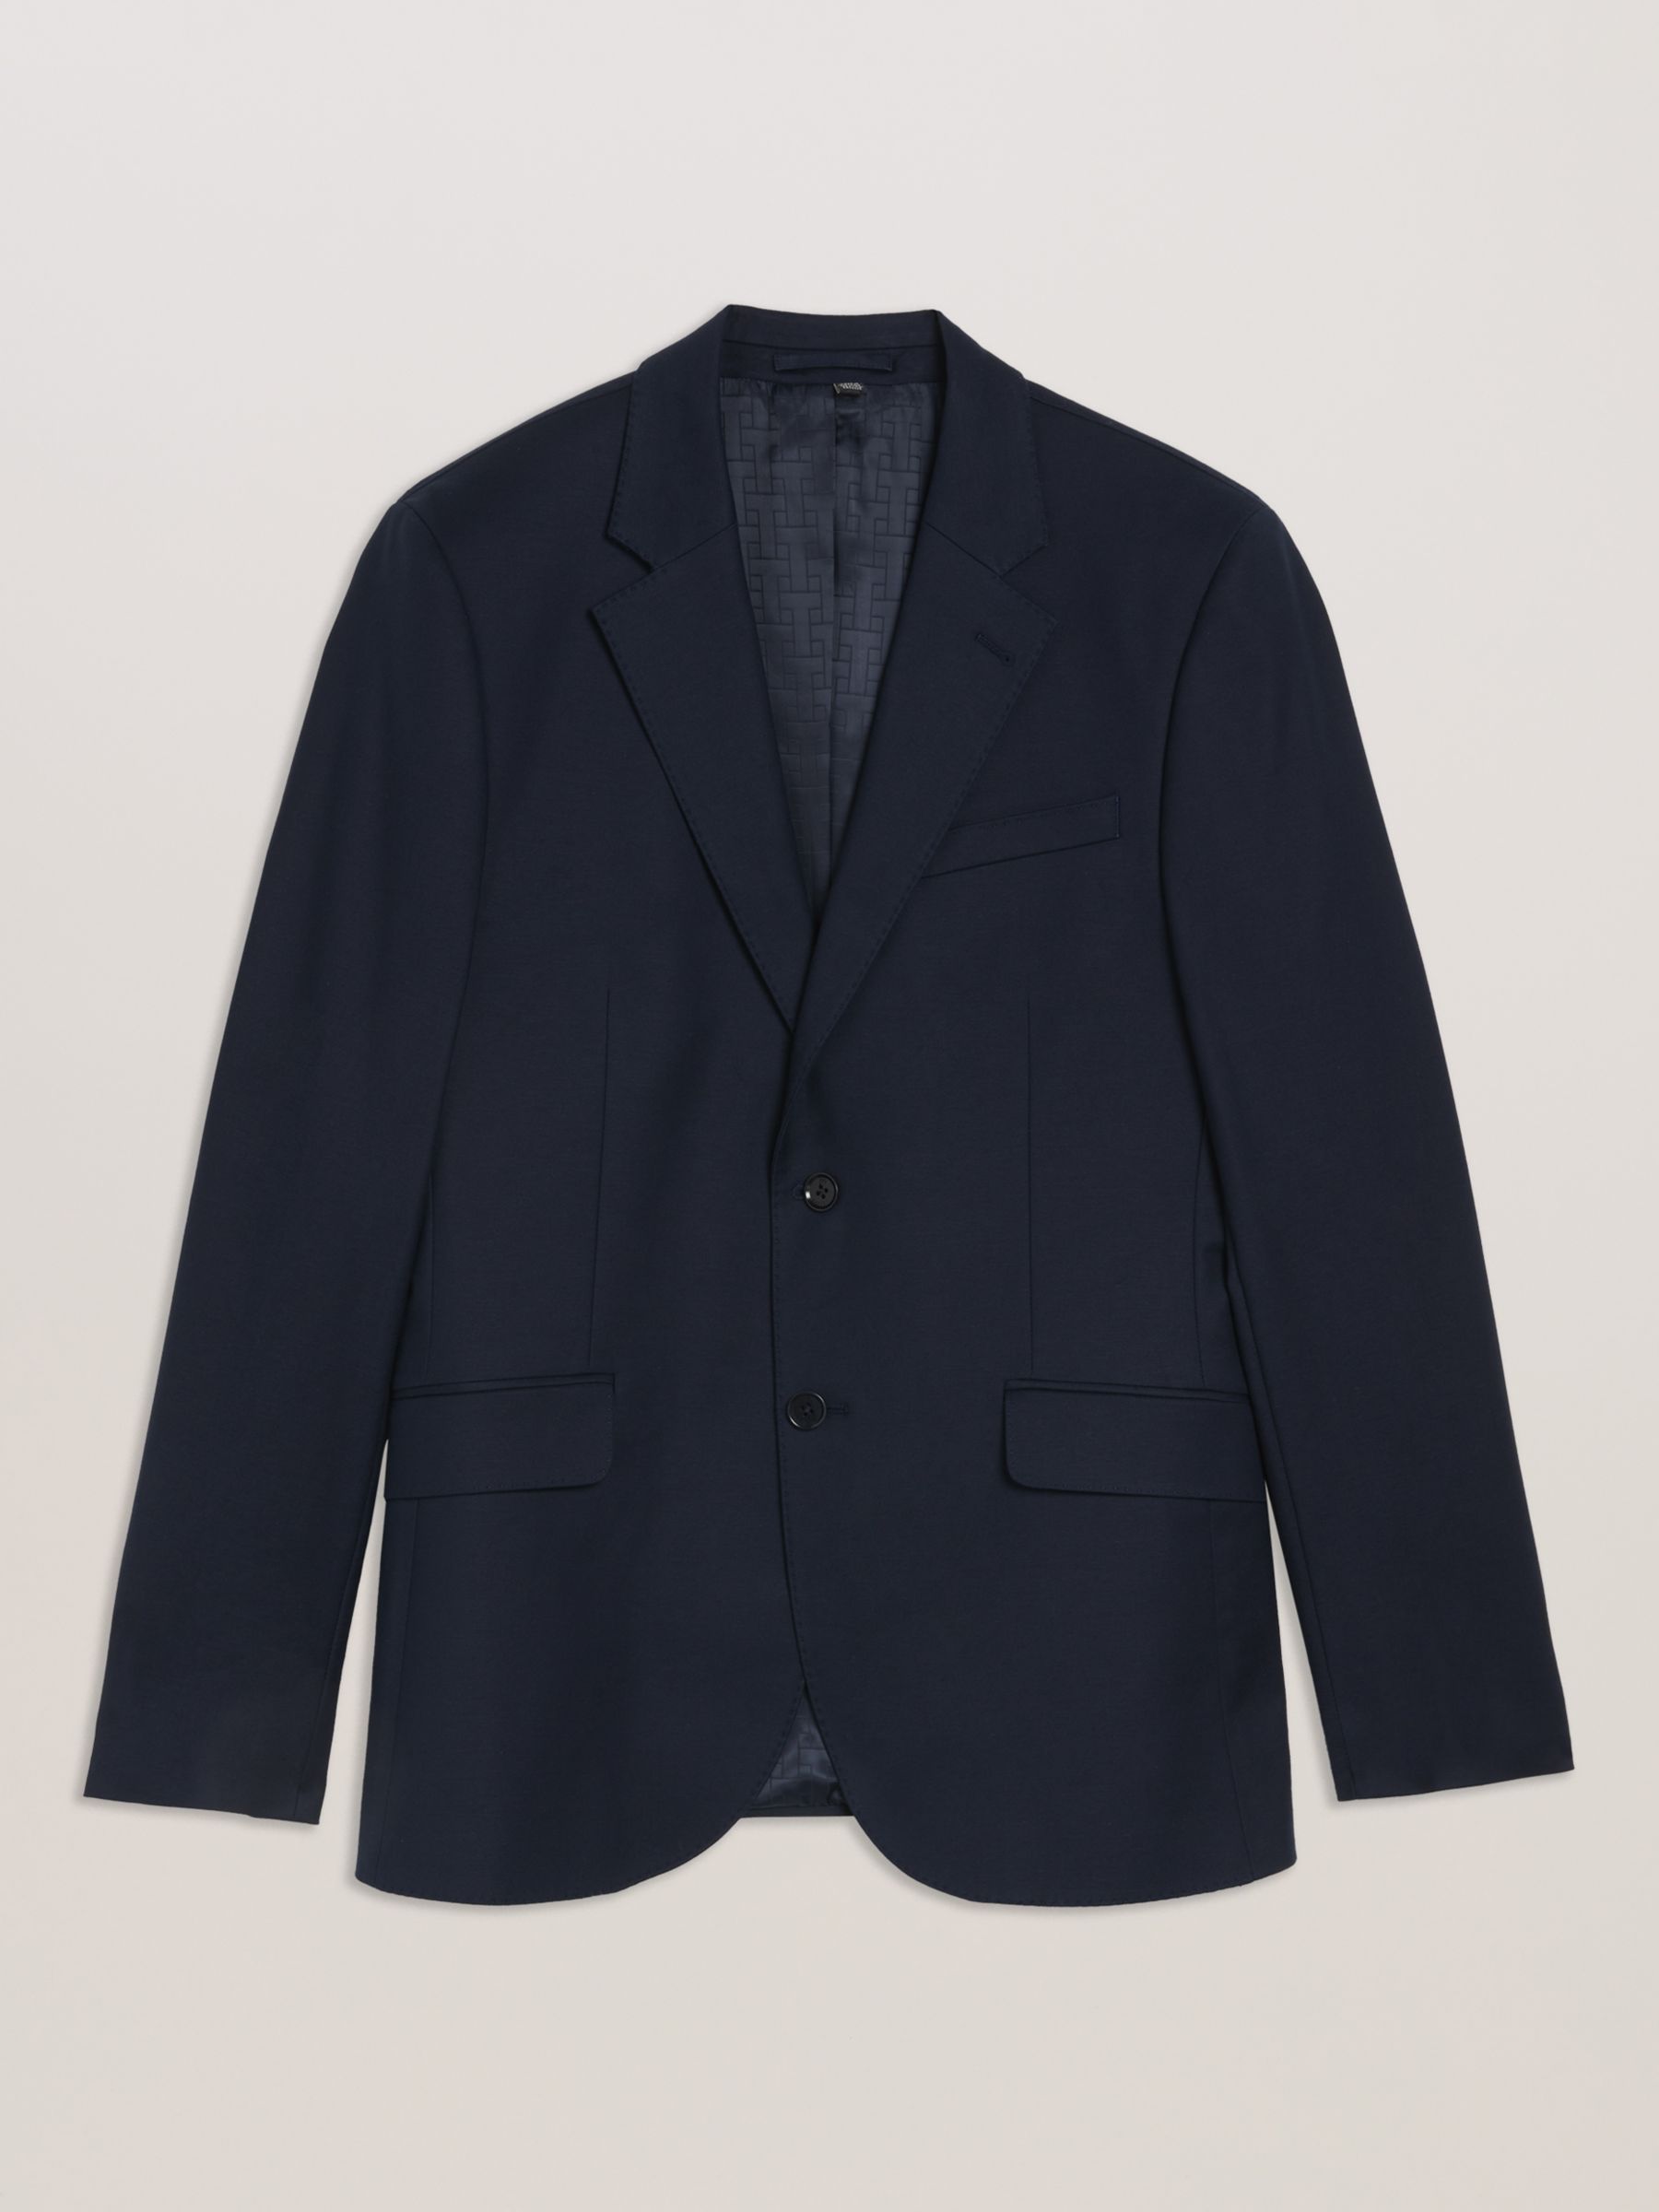 Ted Baker Compact Cotton Blazer, Navy, S